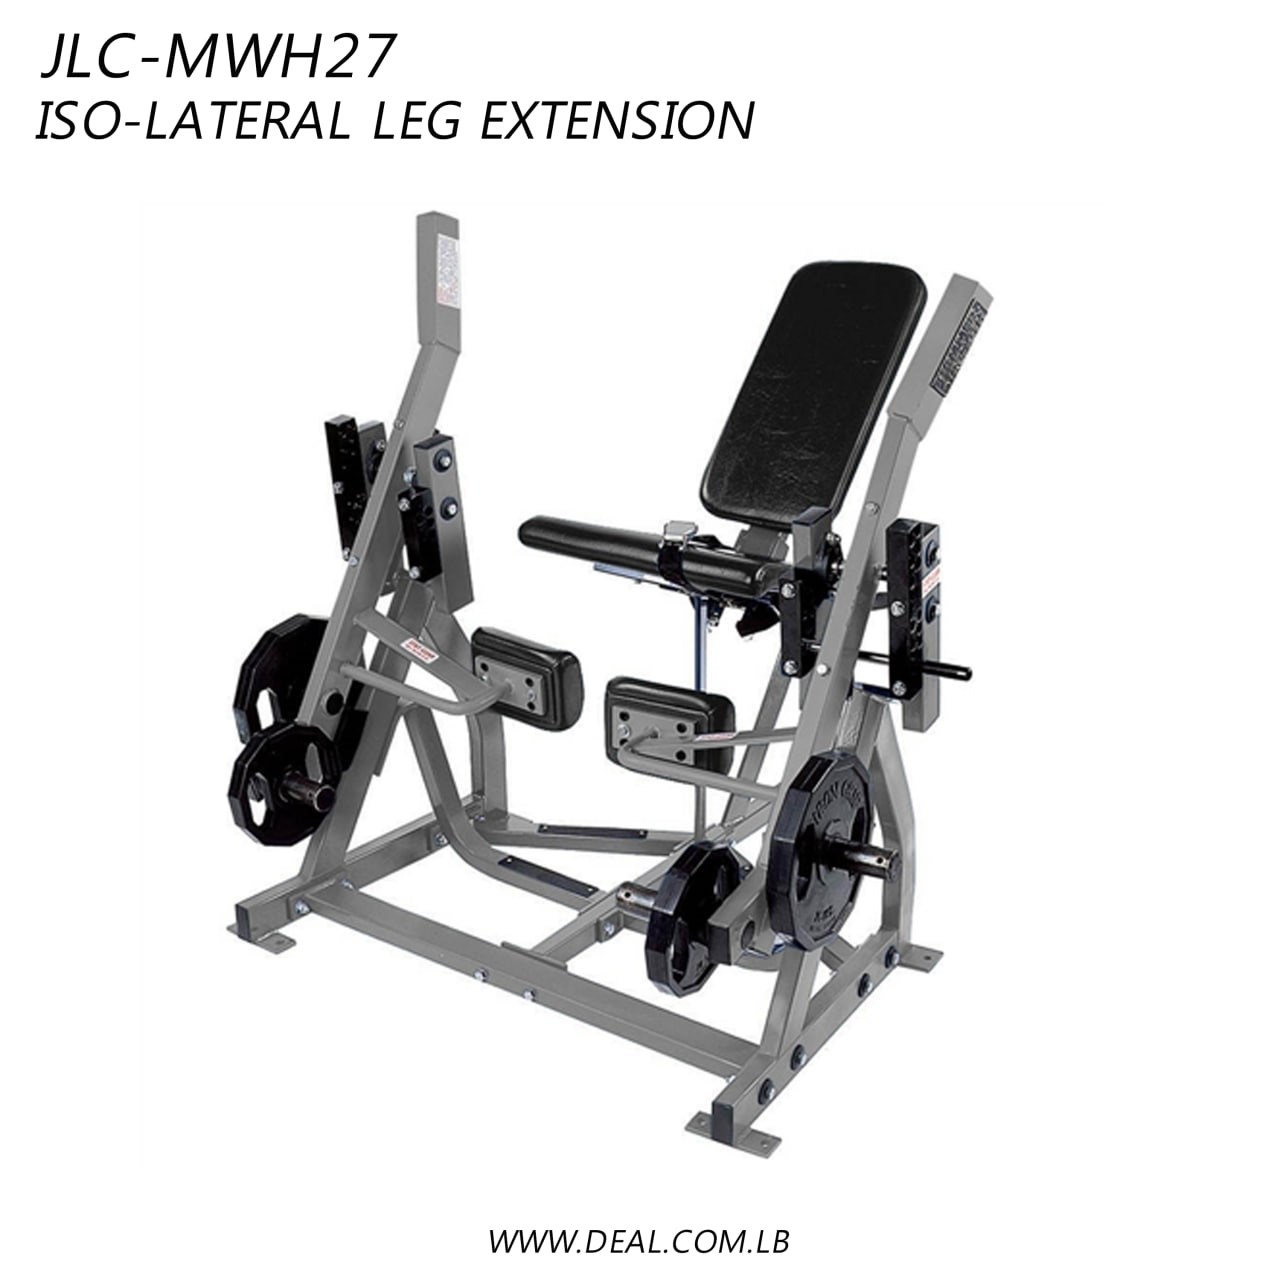 JLC-MWH27 | ISO-Lateral leg extension